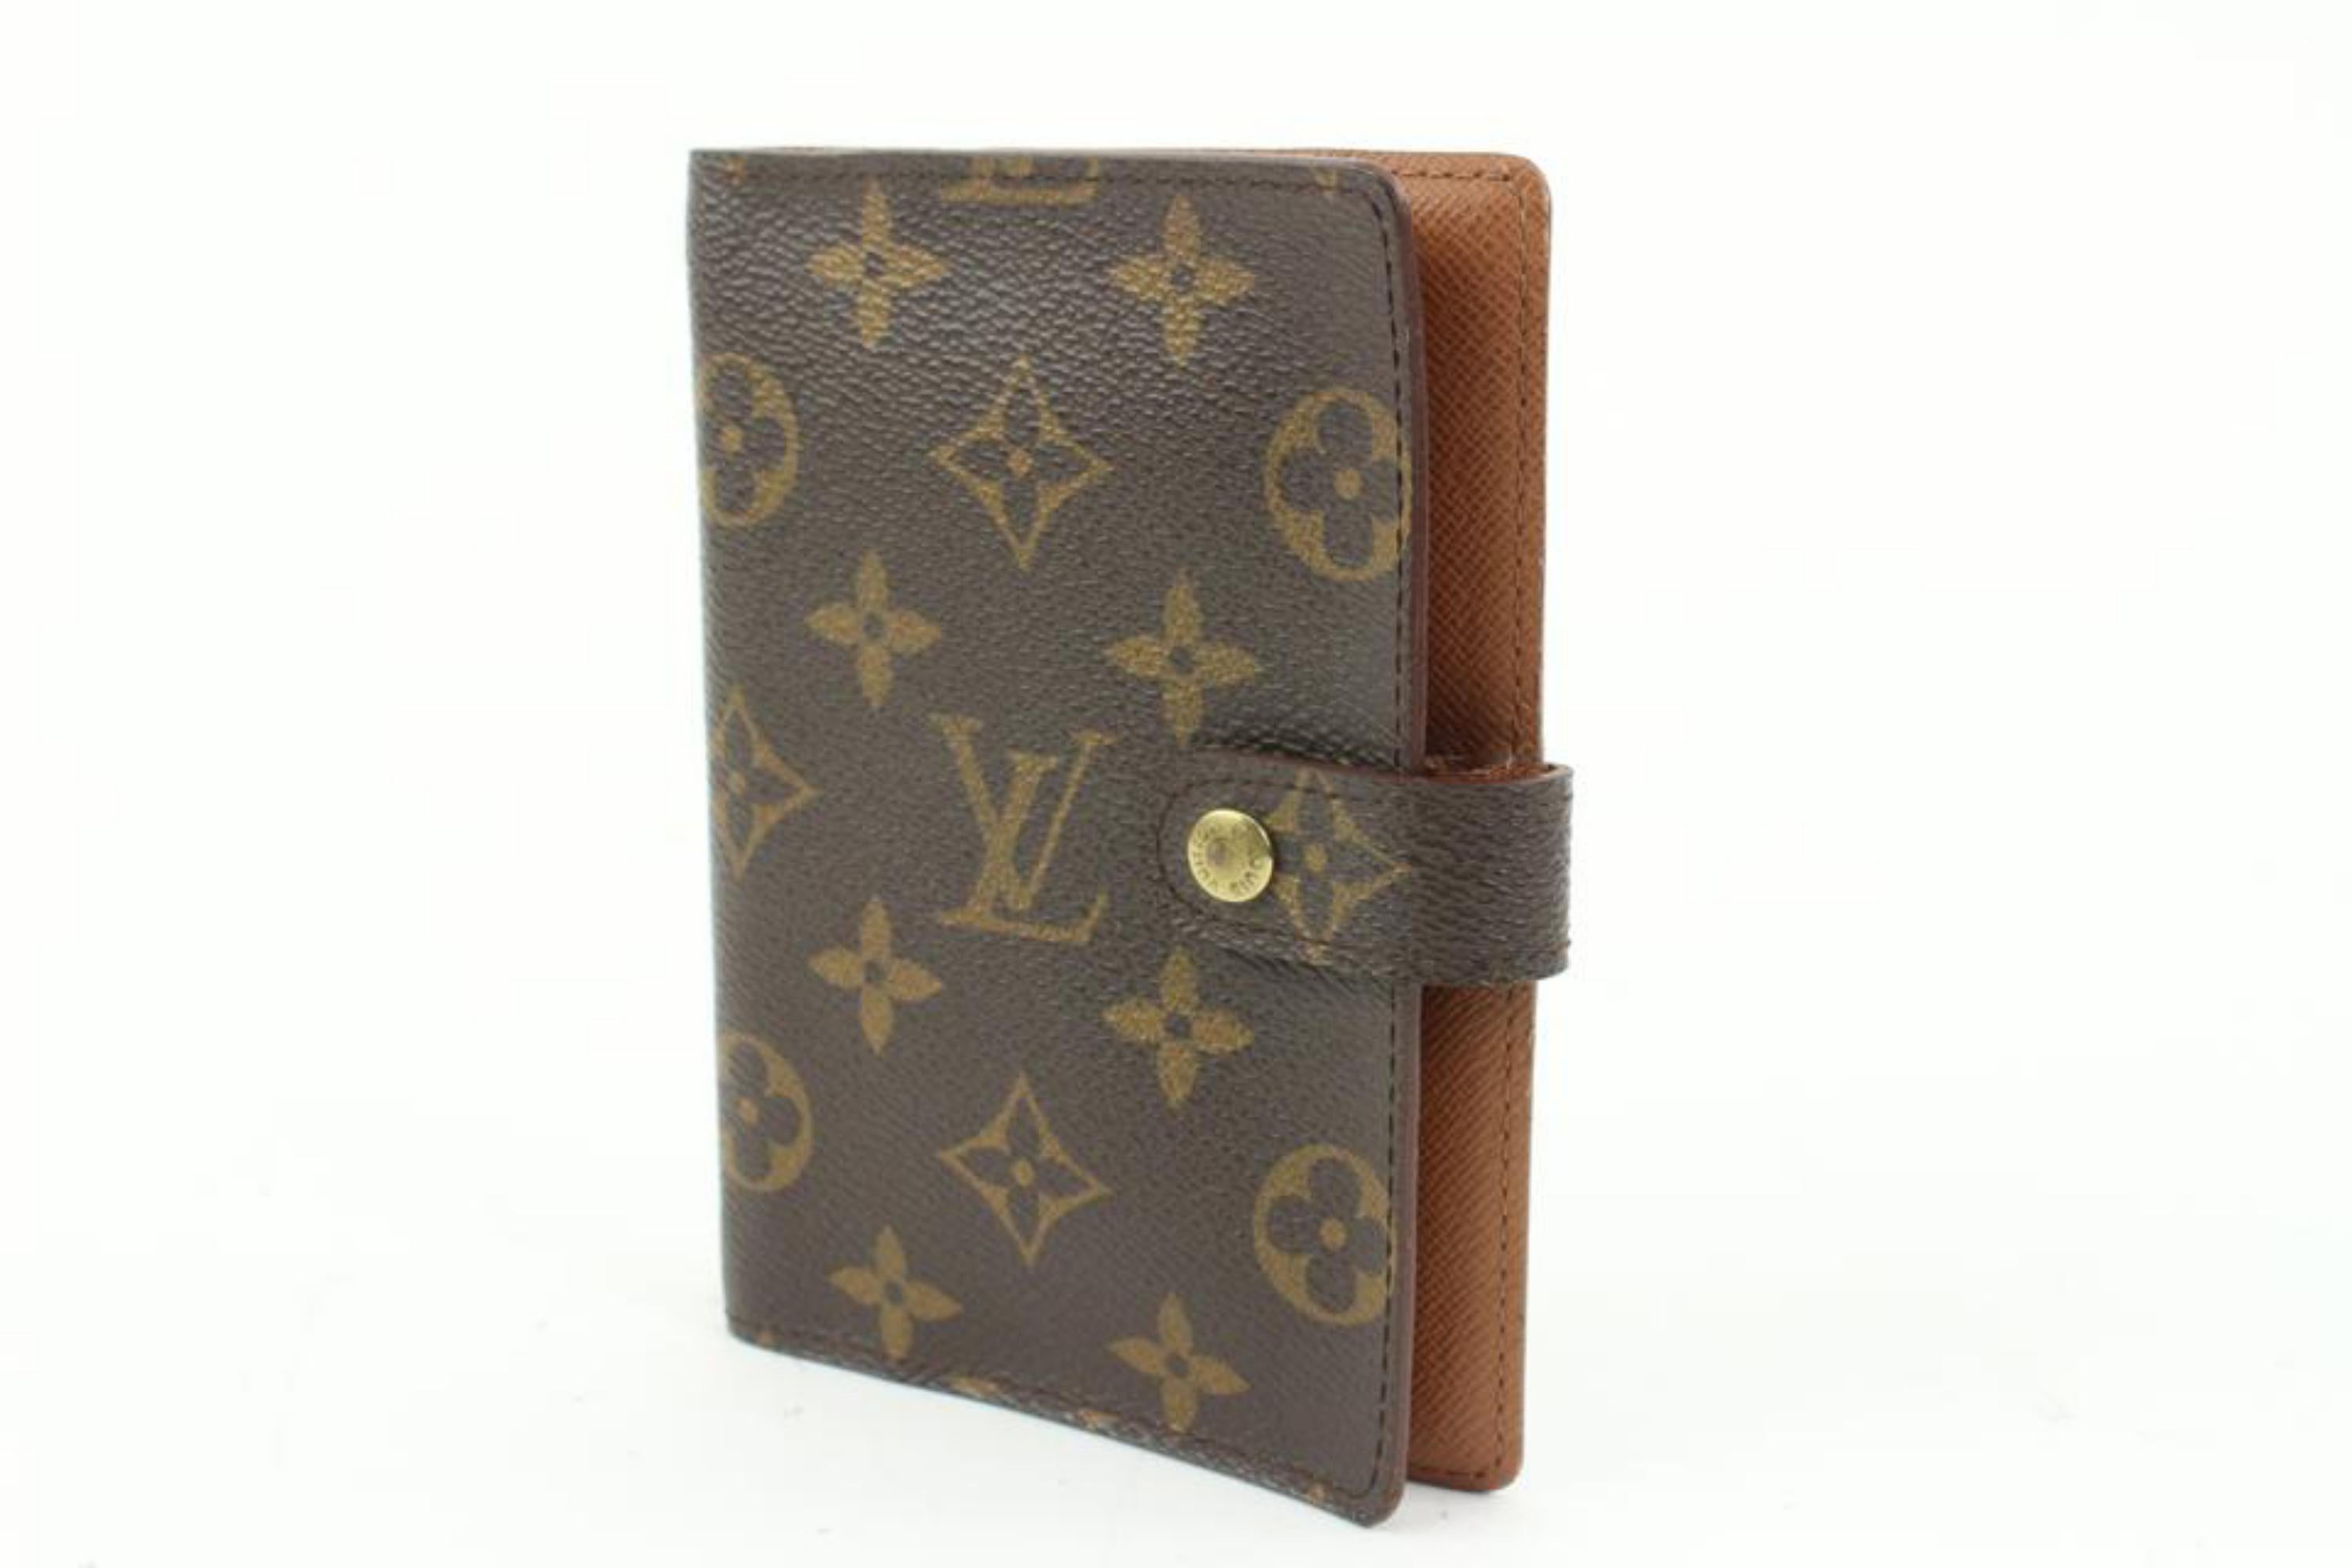 Louis Vuitton Agenda Notebook - 6 For Sale on 1stDibs